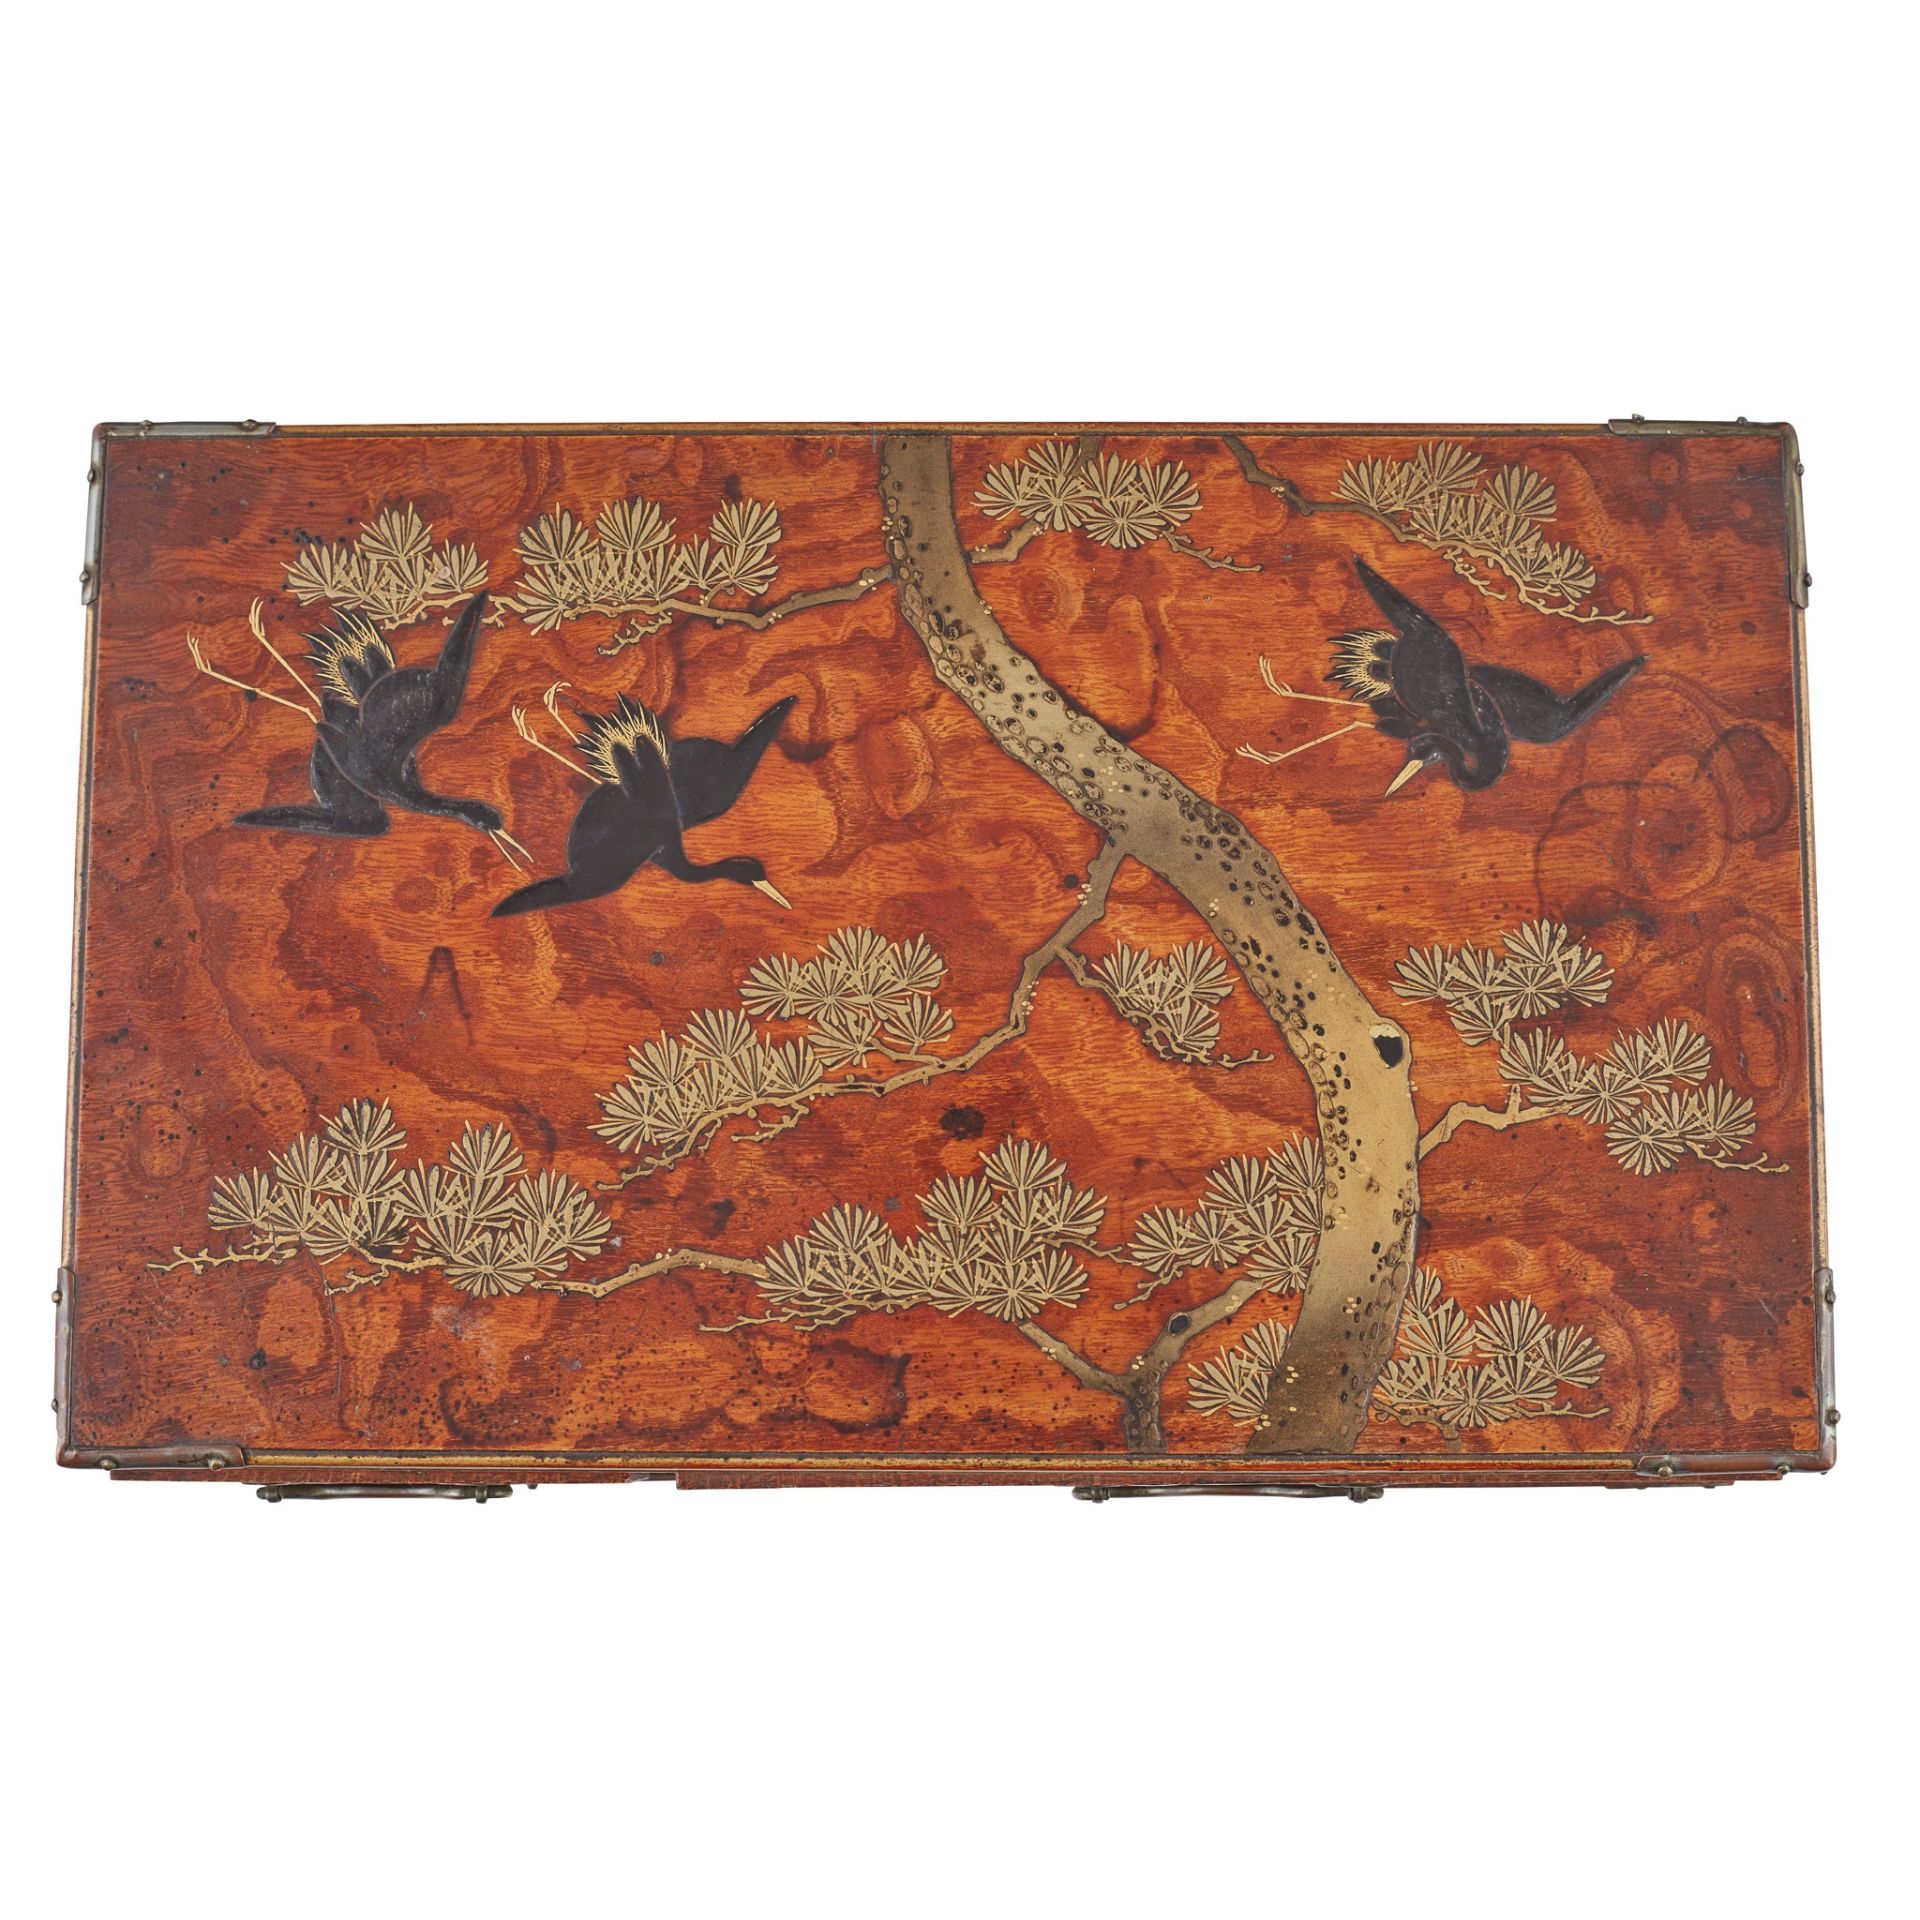 LACQUERED AND GILT-DECORATED KODANSU (CABINET) MEIJI PERIOD - Image 2 of 2